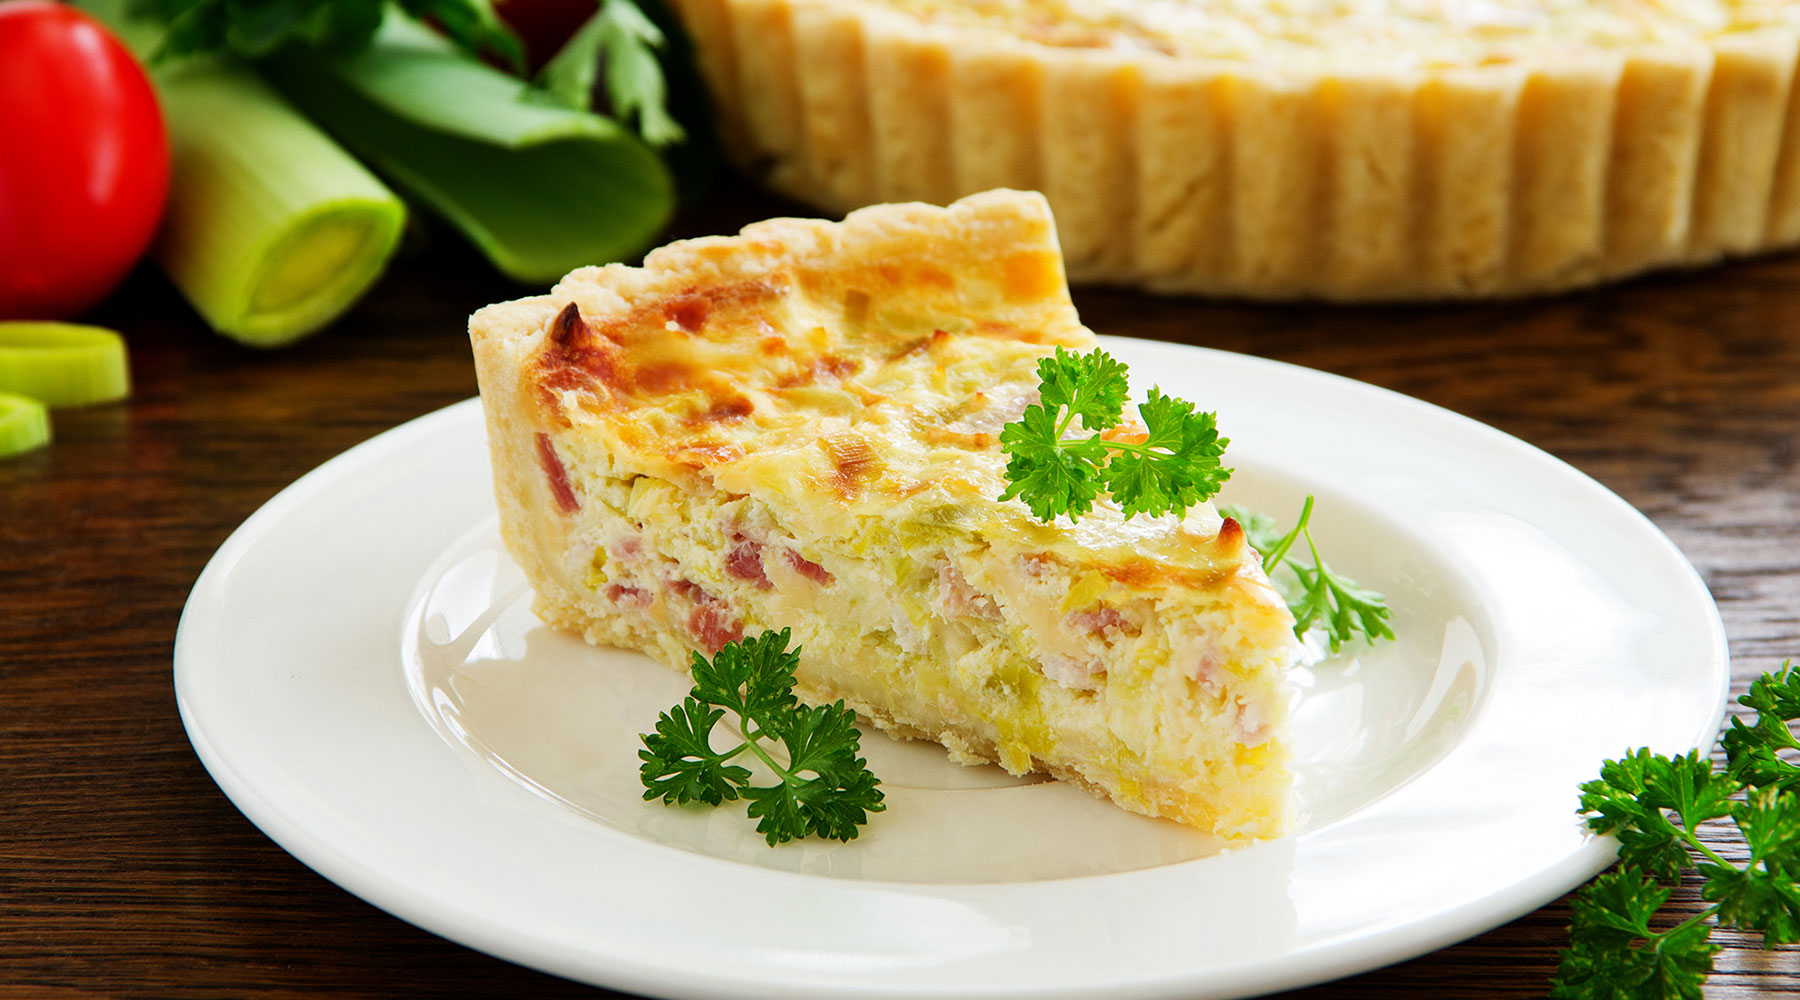 a slice of quiche on a white plate